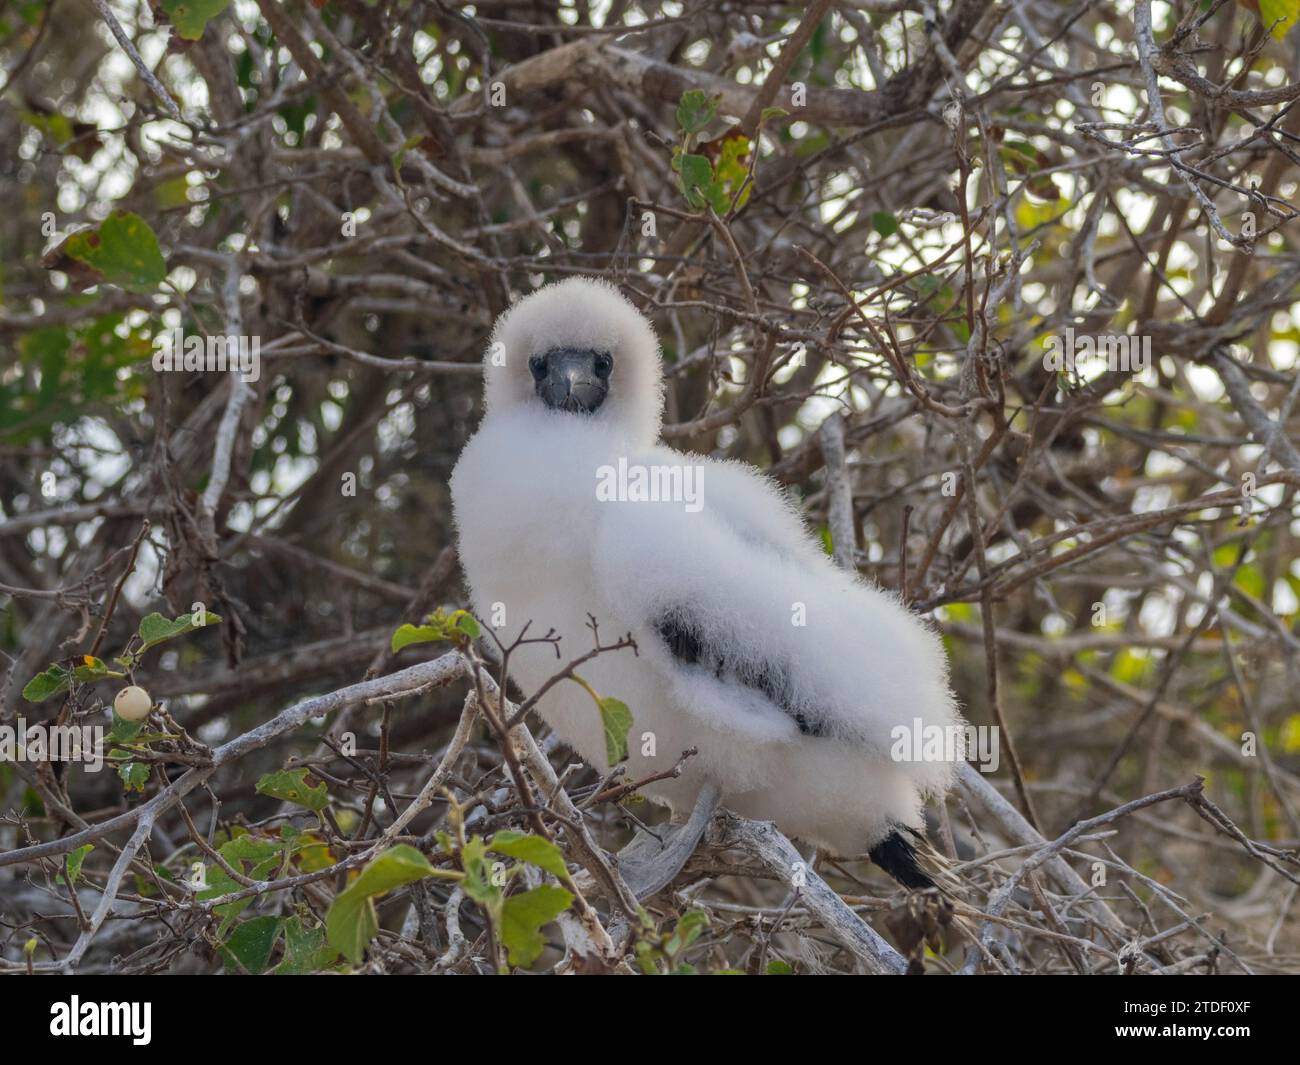 A red-footed booby (Sula sula) chick in a tree at Punta Pitt, San Cristobal Island, Galapagos Islands, UNESCO World Heritage Site, Ecuador Stock Photo